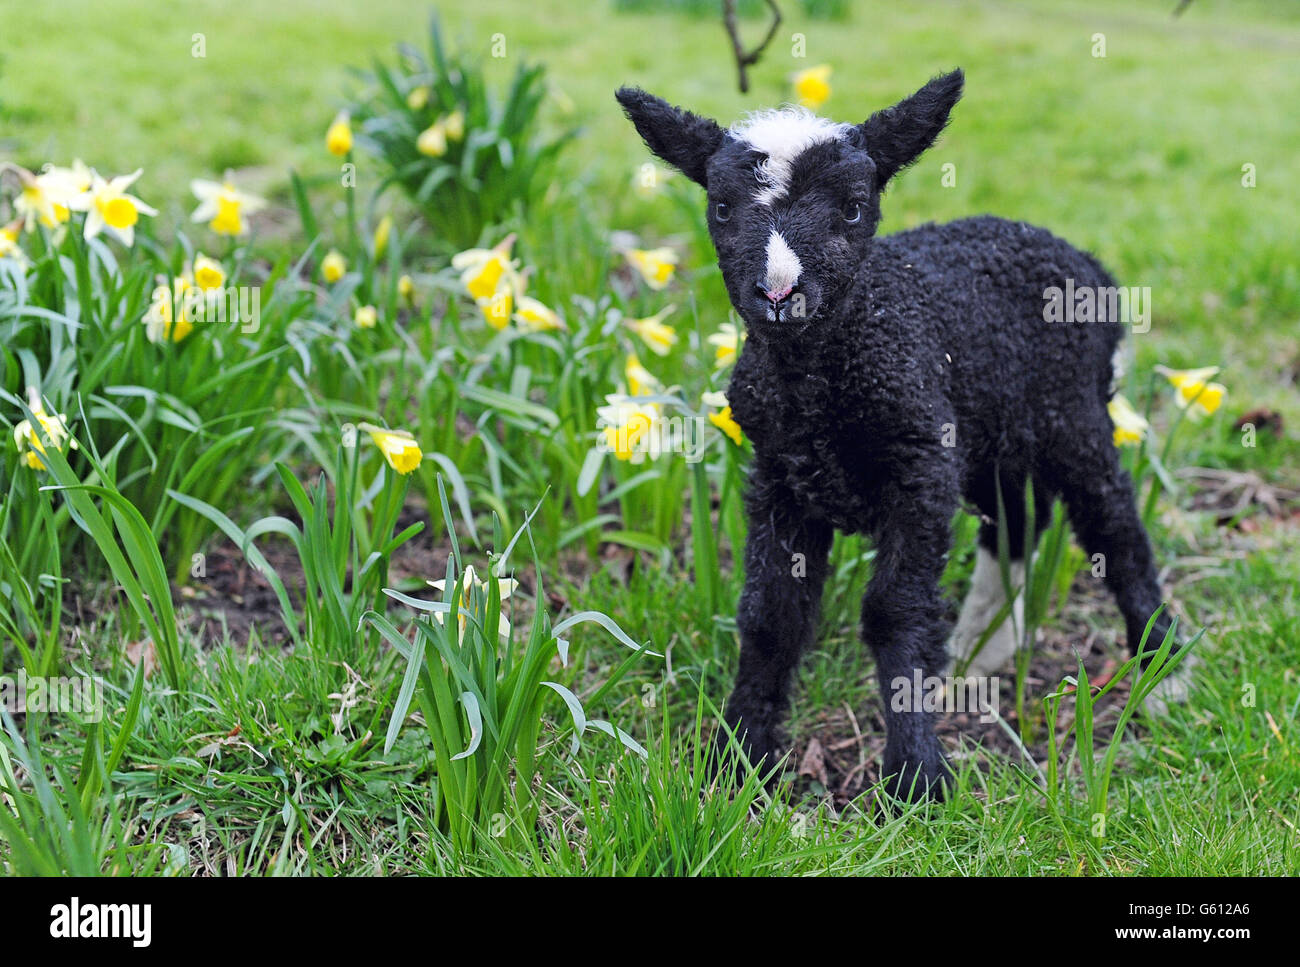 A newborn black and white lamb of the Dutch Zwartbles breed standing among the daffodils in the garden of retired vet Alistair Rae in Staveley, Knaresborough, North Yorkshire. Stock Photo